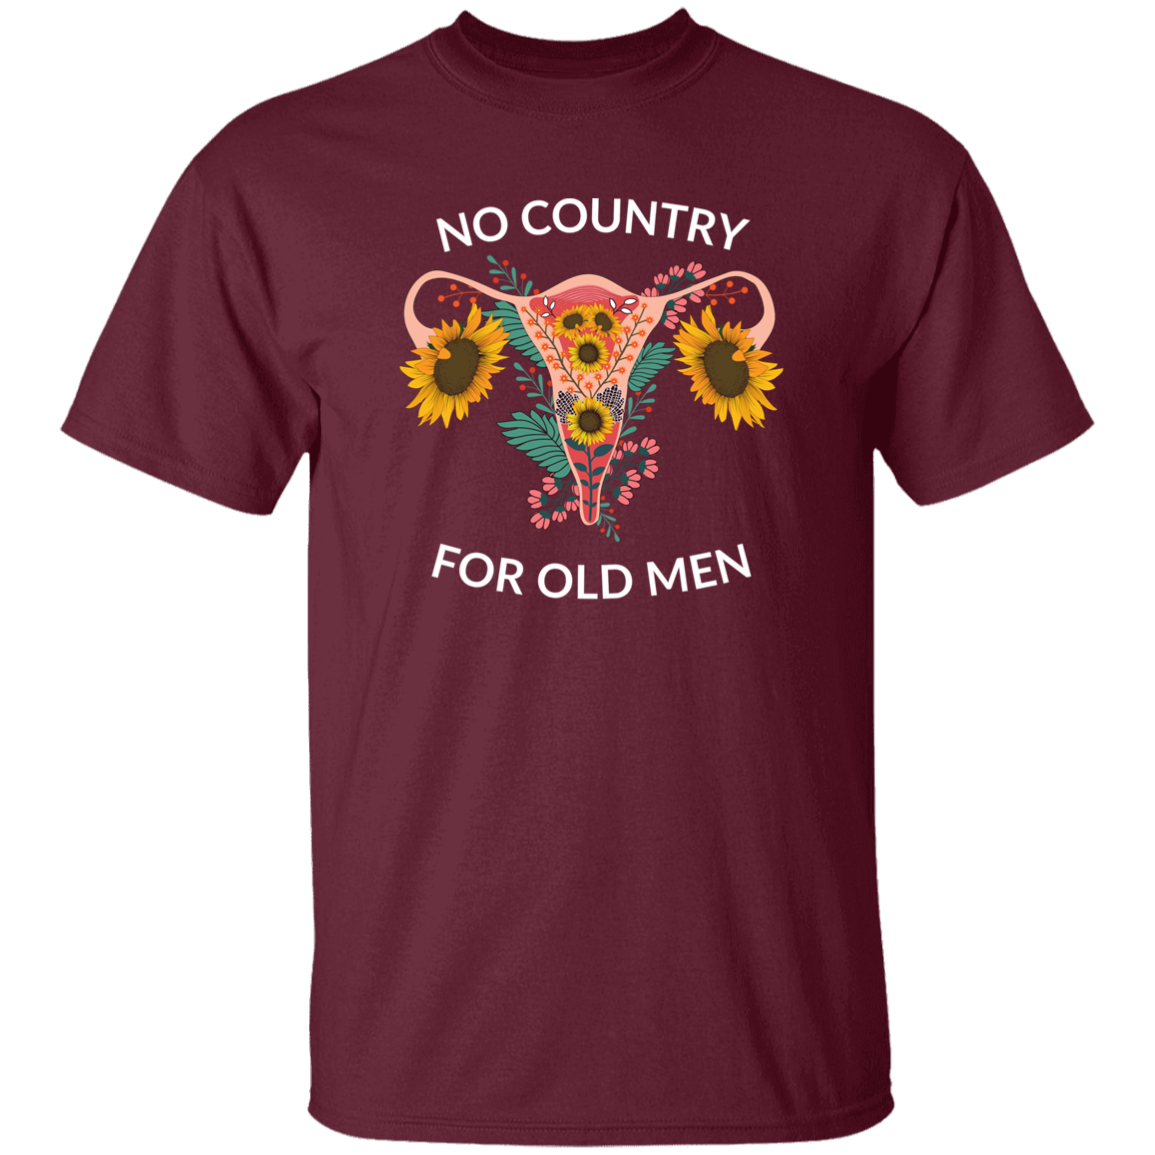 No Country For Old Men (Sunflower) Tee - Unisex